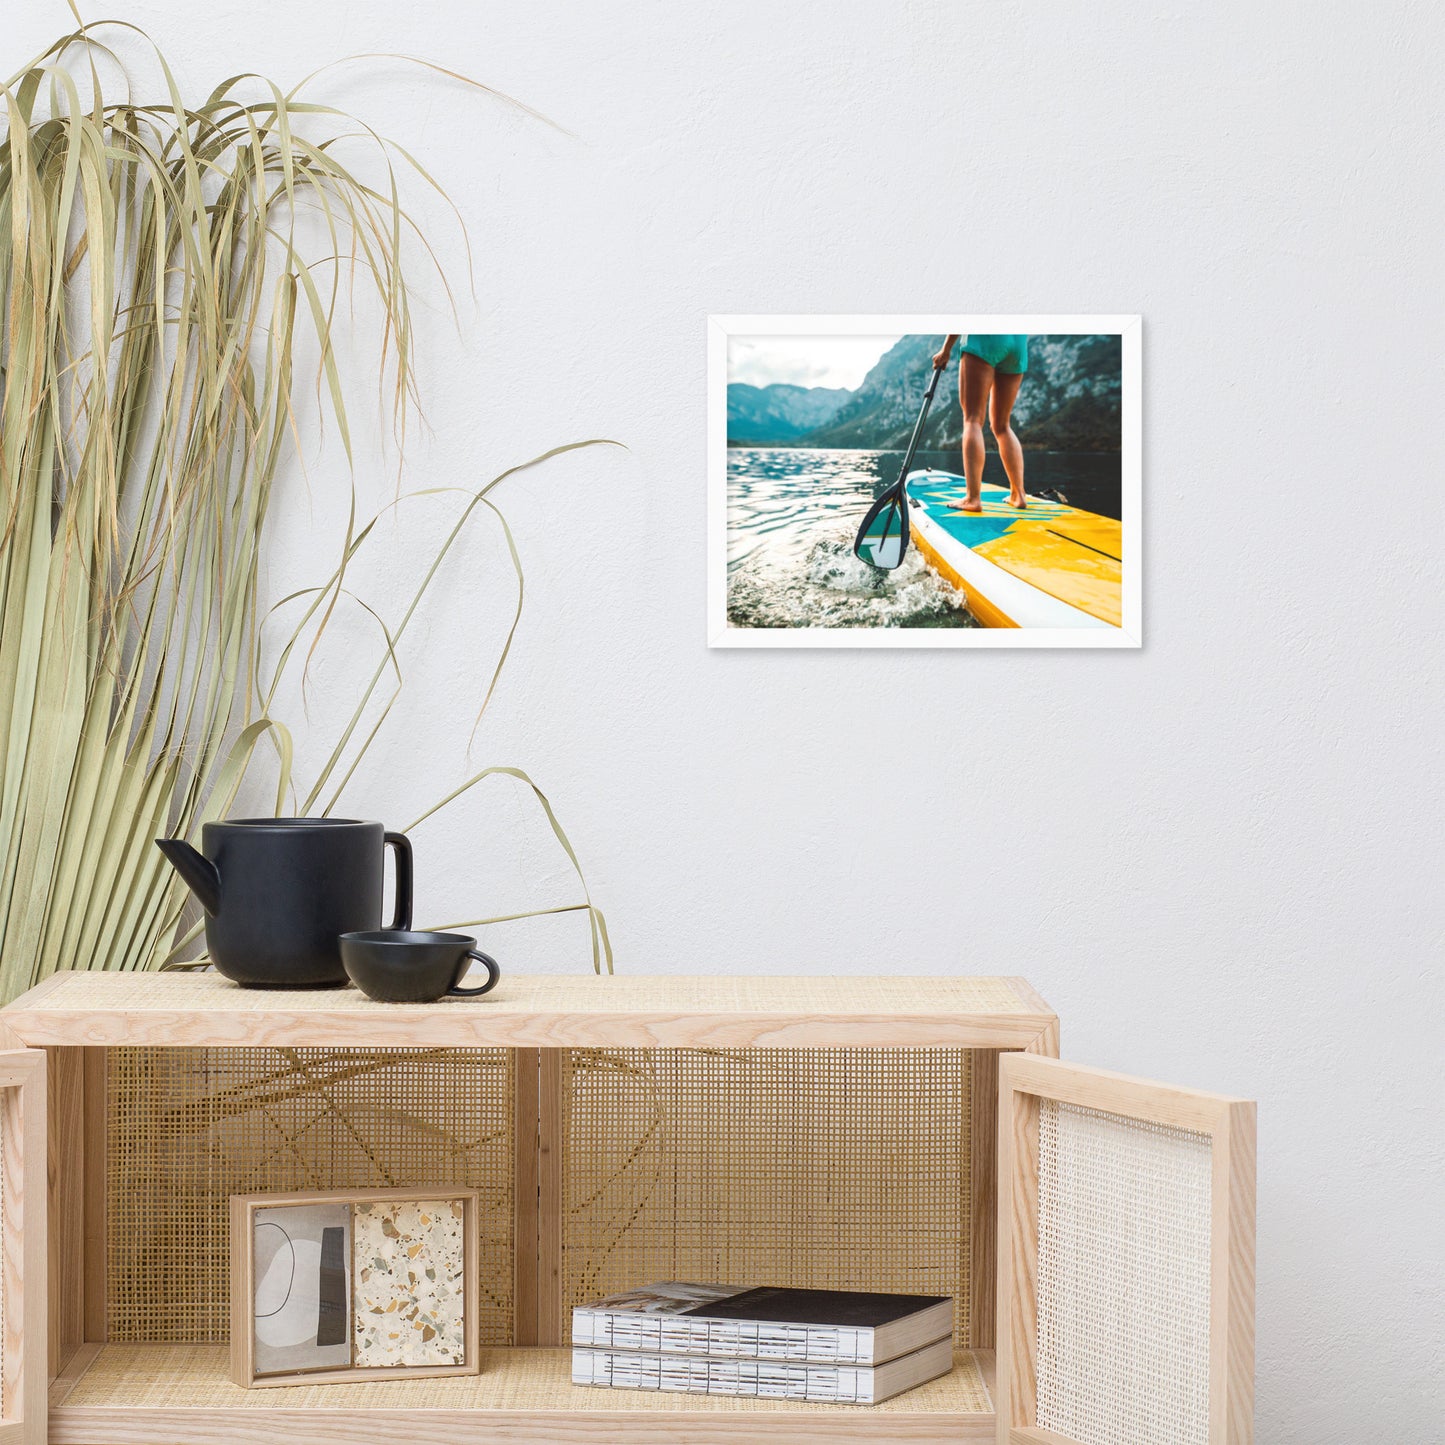 A Moment of Solitude Lifestyle Photograph Framed Wall Art Print